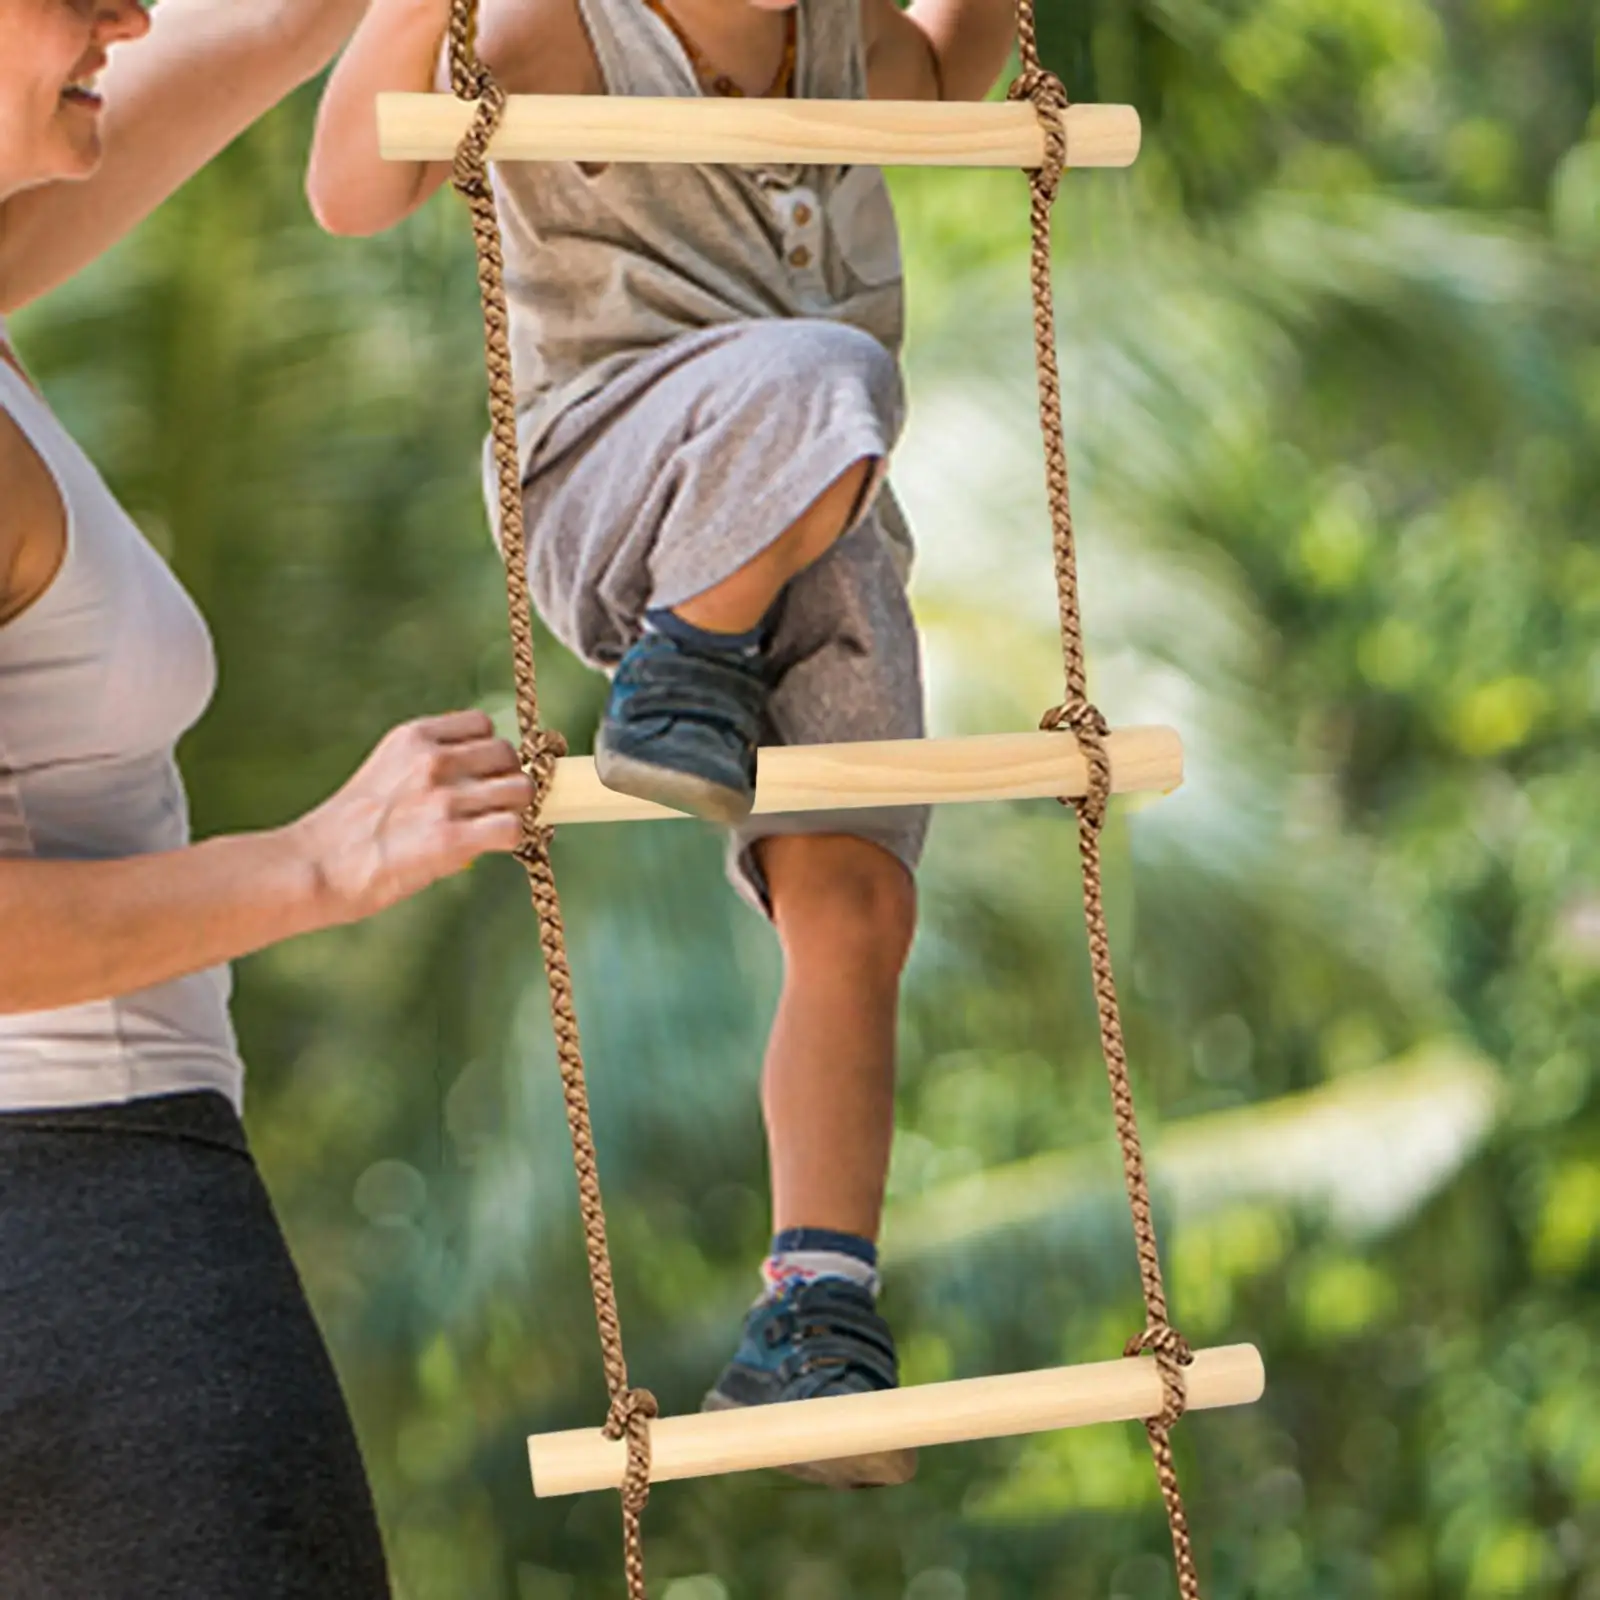 Climbing Rope Ladder for Kids Climber Toy Attachments 6 Wood Rungs Climbing